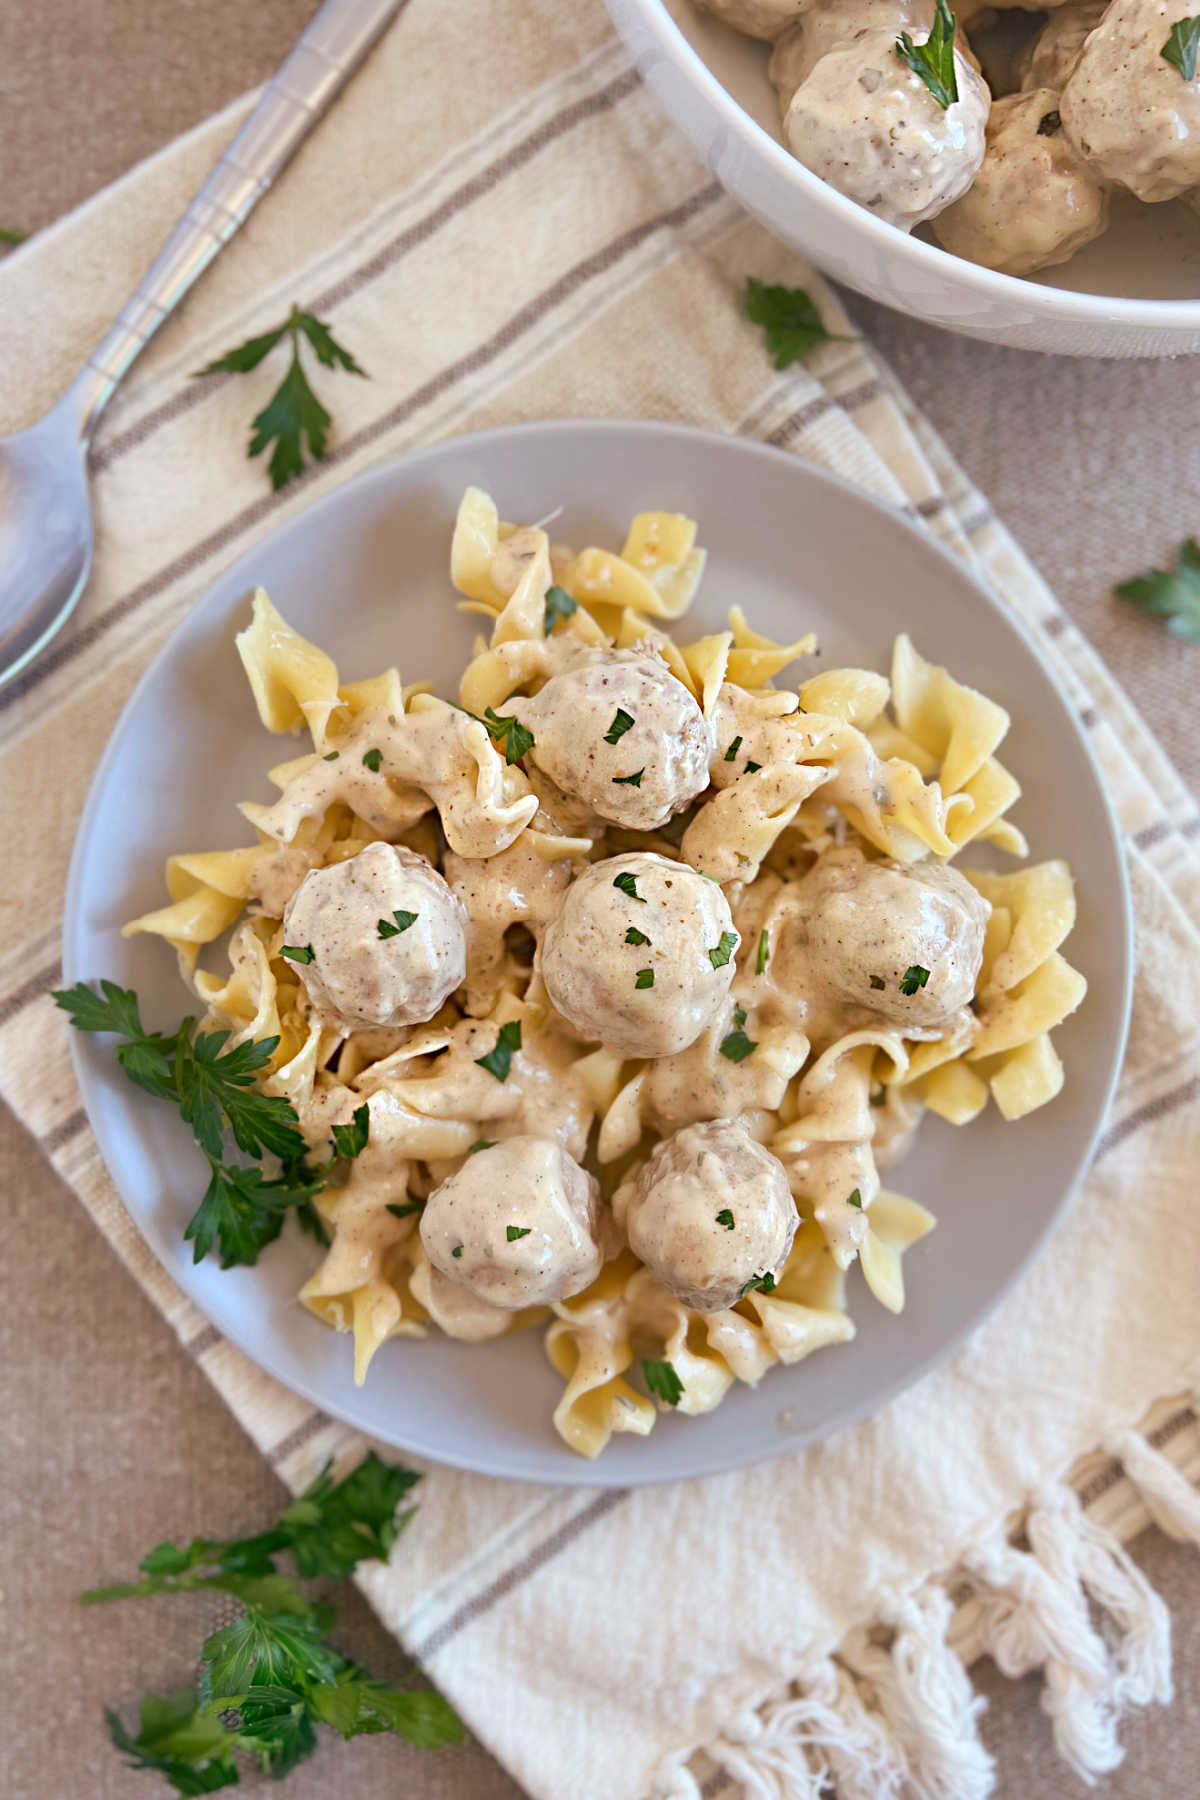 plate of Swedish meatballs in creamy white sauce over egg noodles